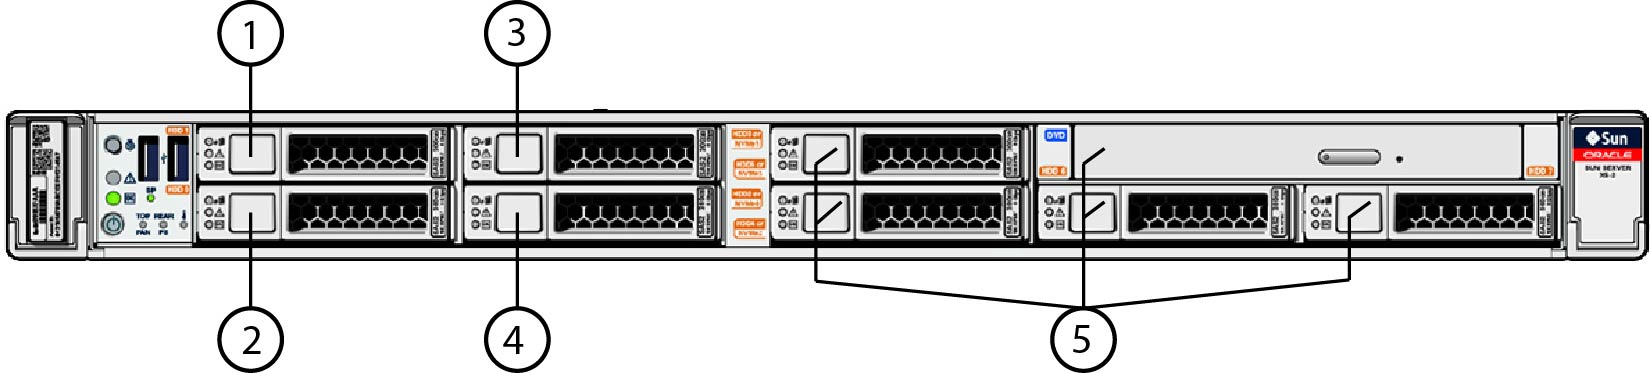 image:Figure showing the location and numbering of the storage drives.